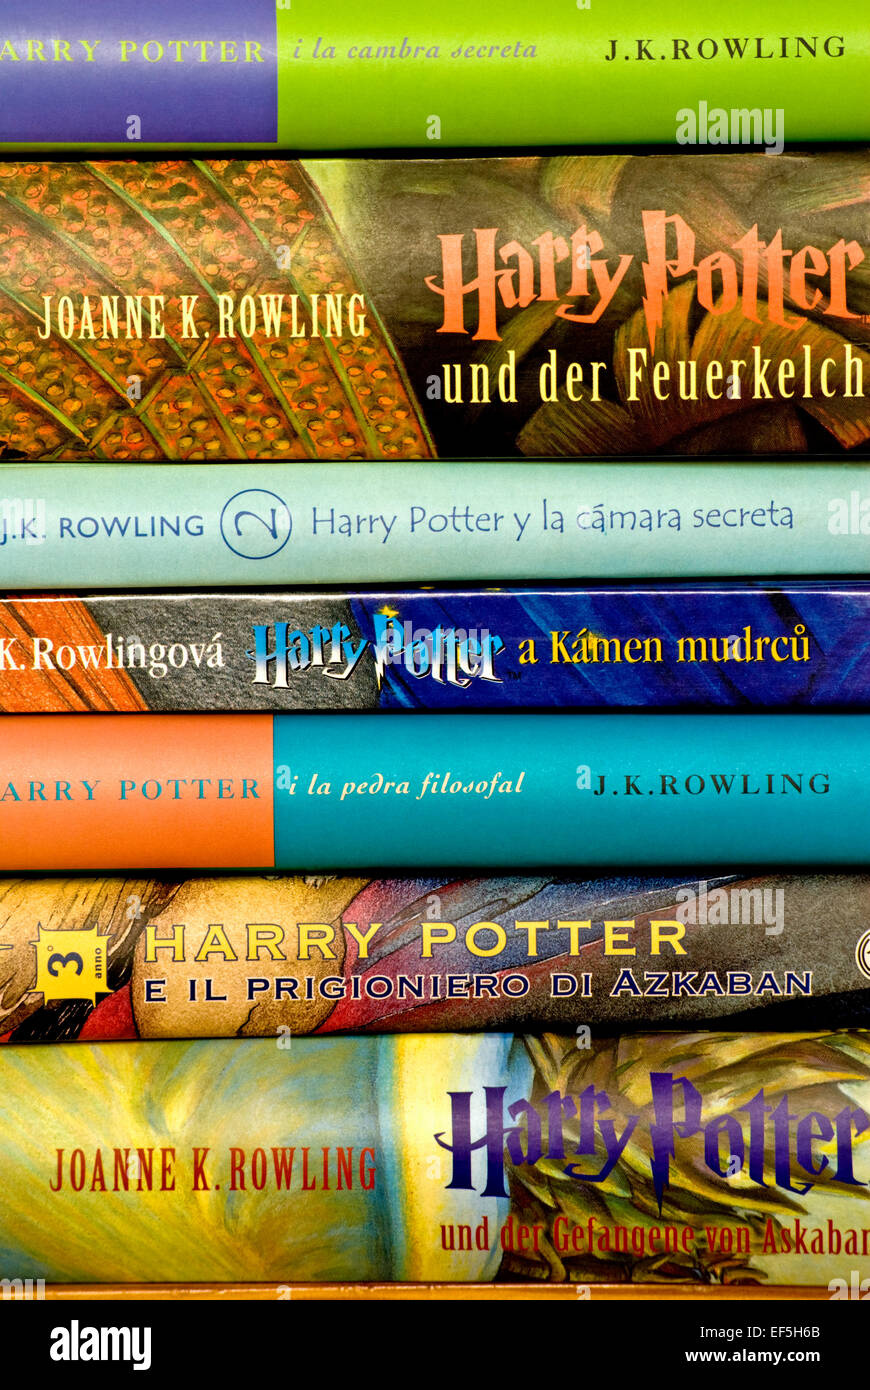 J K Rowling's Harry Potter books in foreign translations (from top